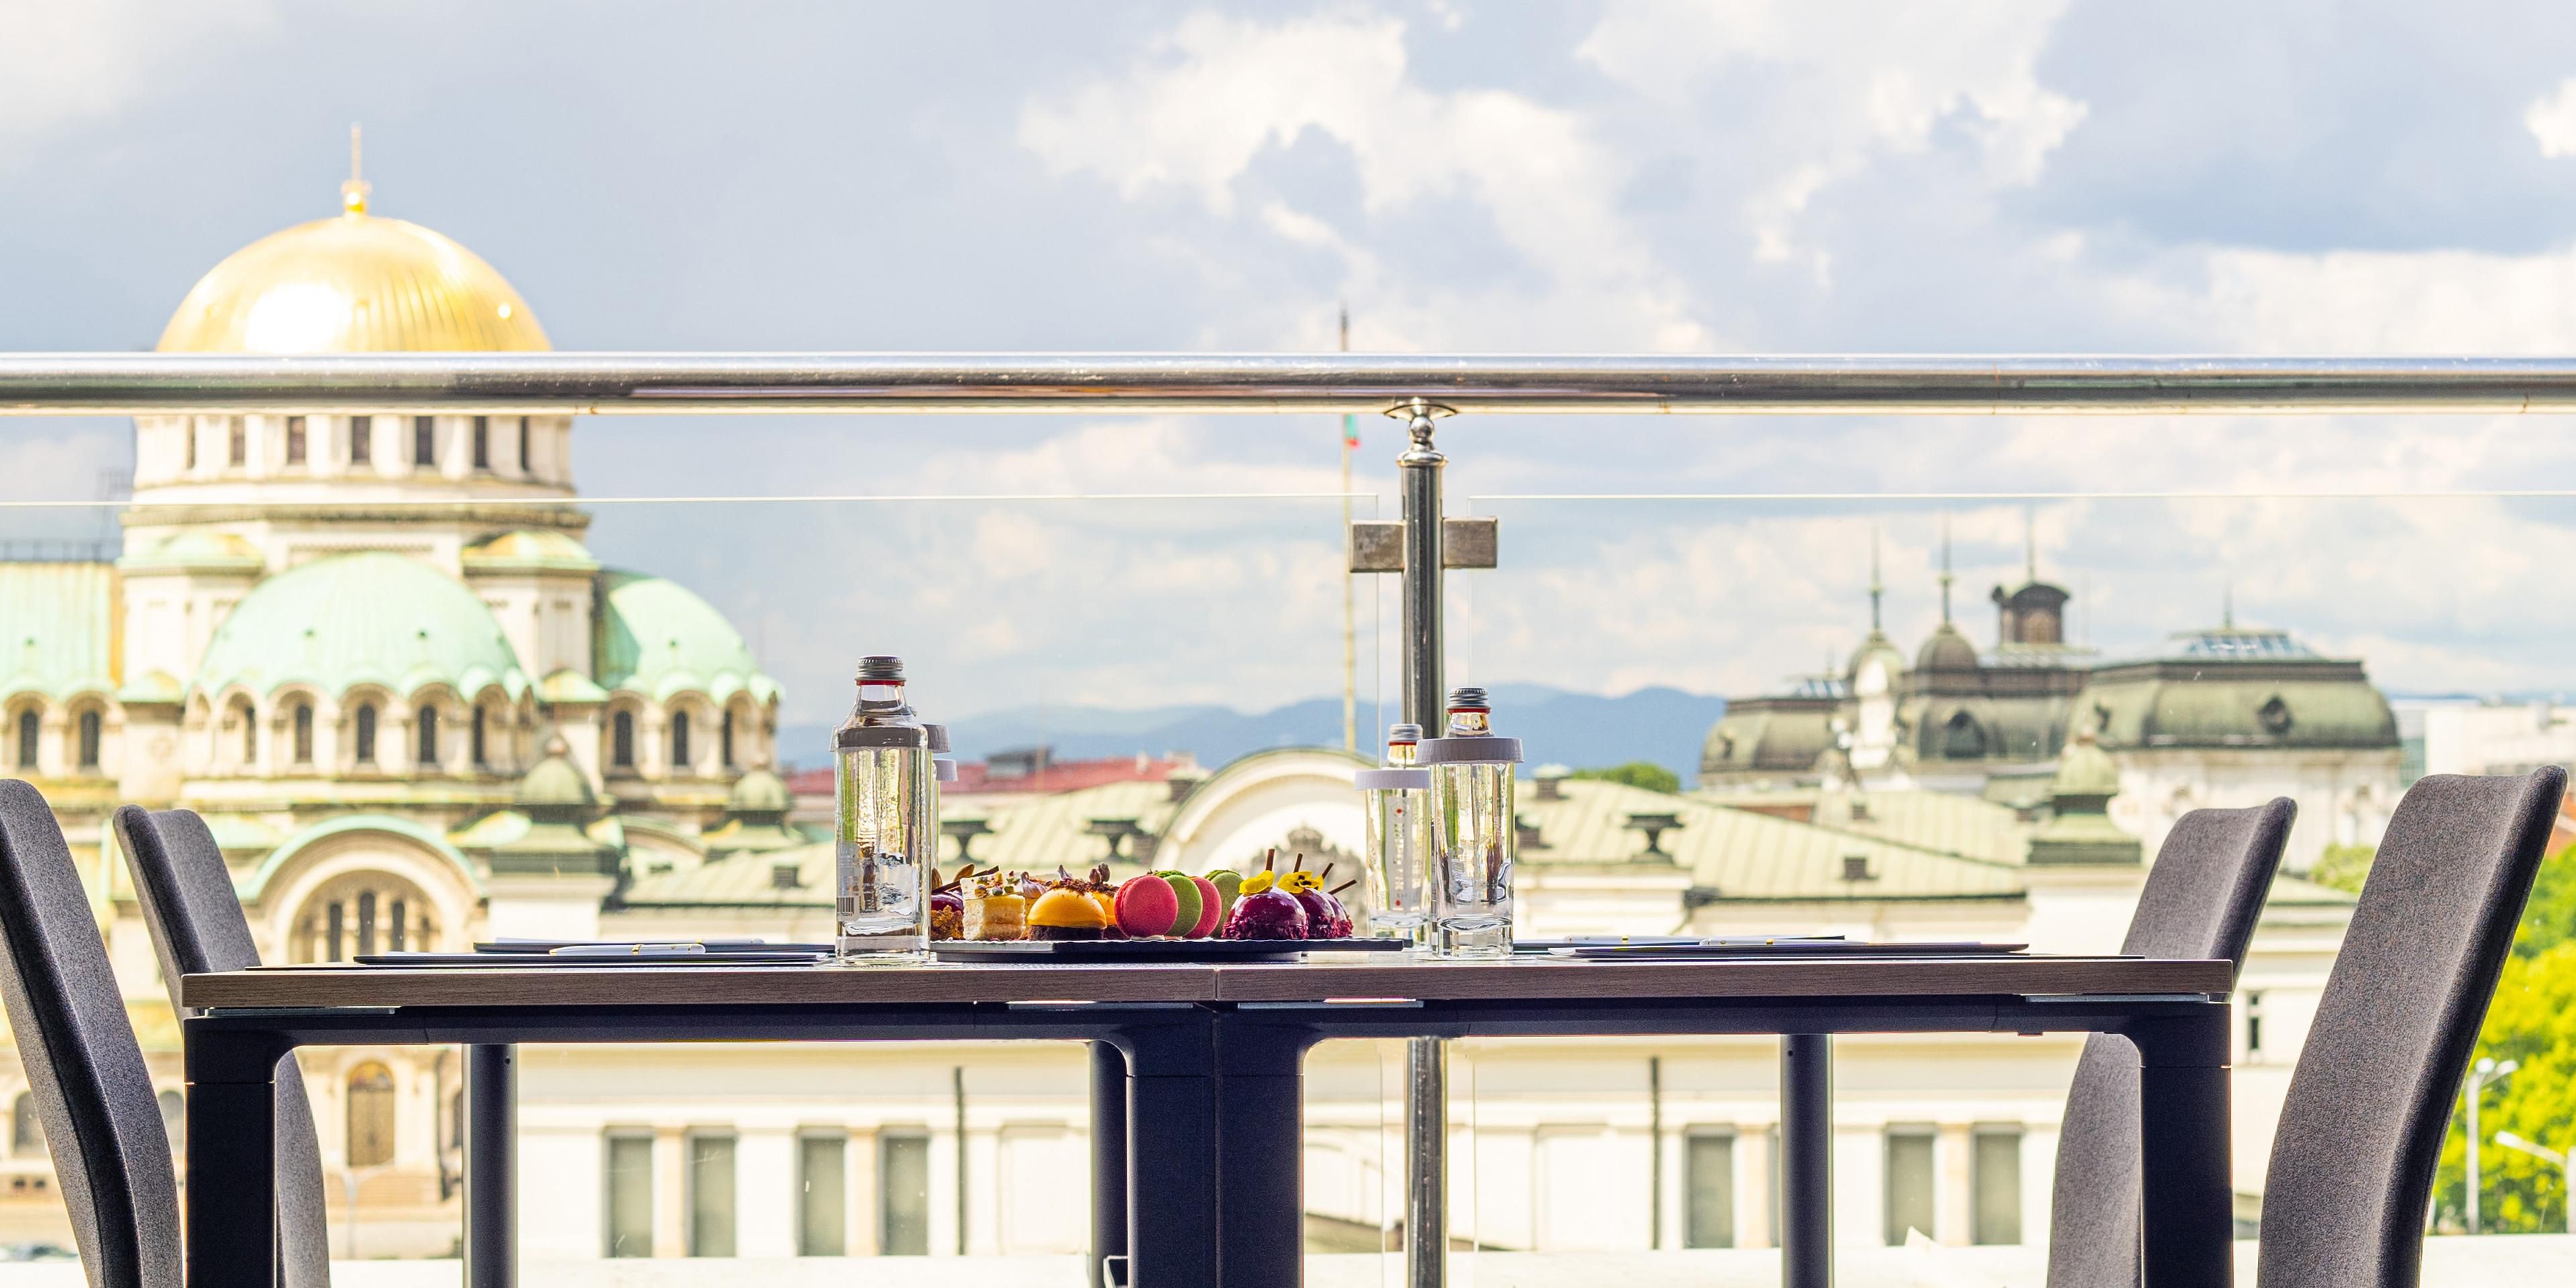 Make the most of your next meeting with the best view in Sofia and impeccable InterContinental service! Book one of our luxurious terrace suites and impress your guests with a breath taking view and variety of premium coffee break and room service offerings. Contact us at: meetings.icsofia@ihg.com